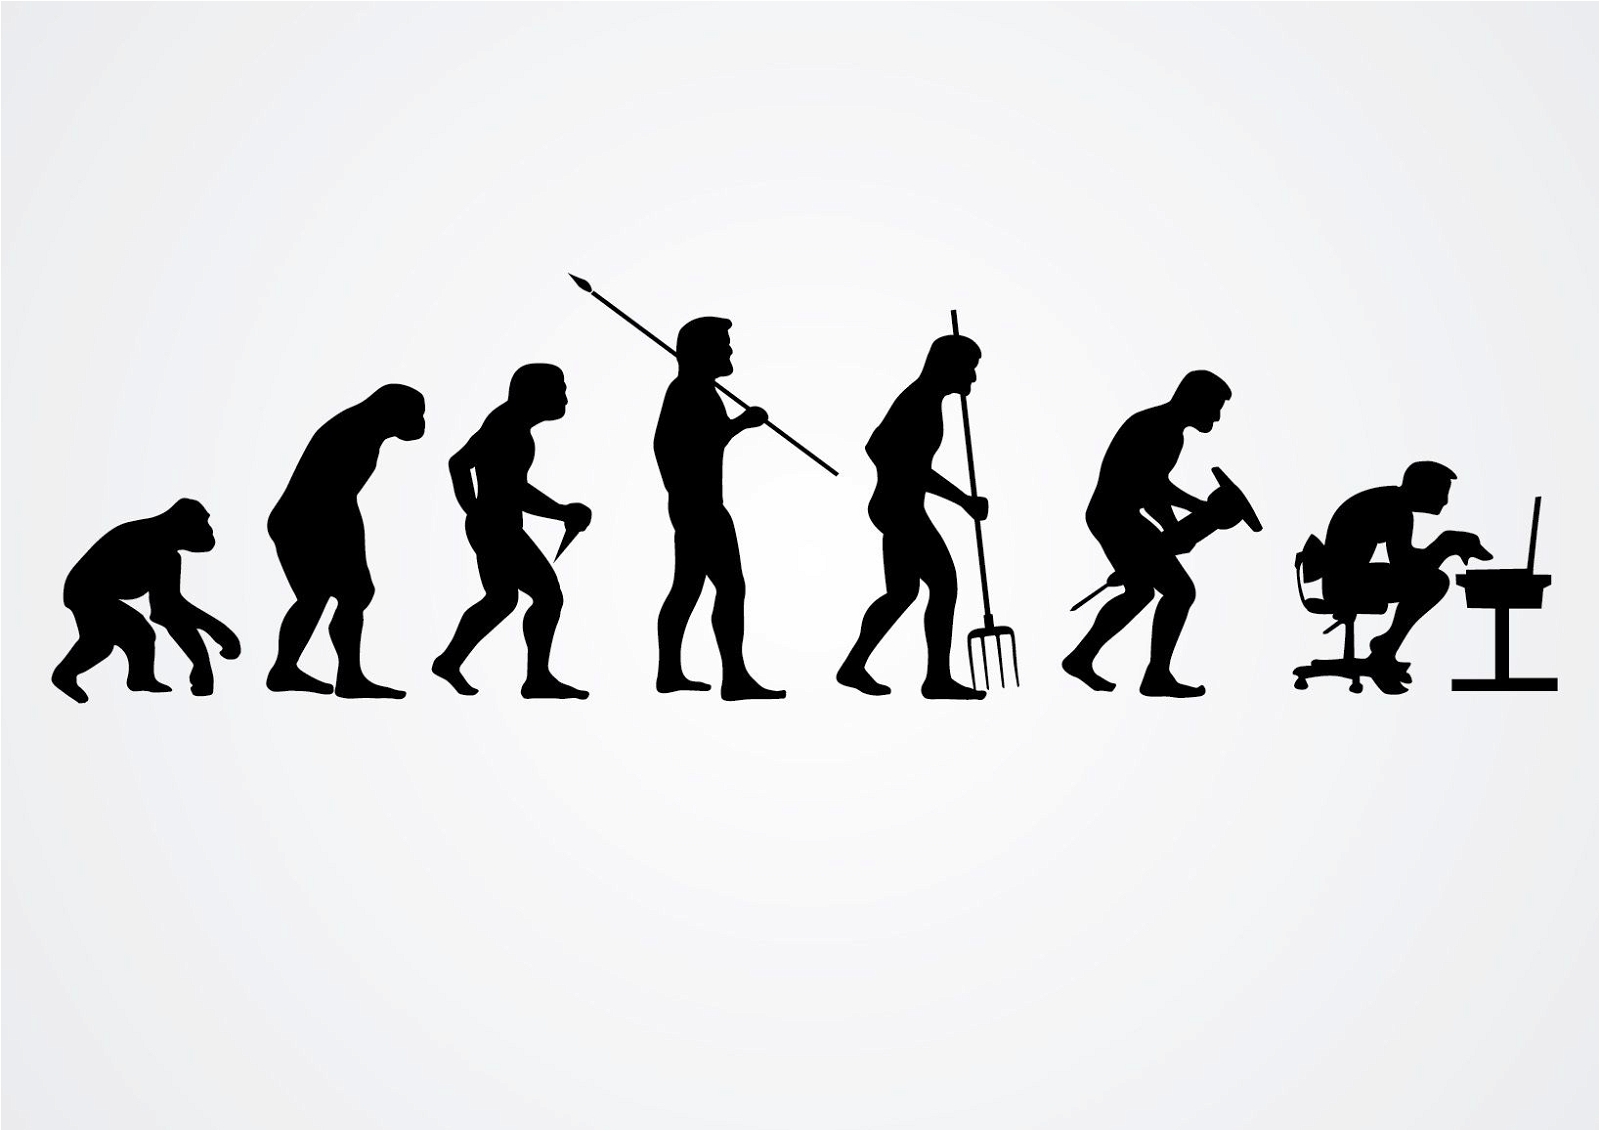 Evolution of human work silhouettes